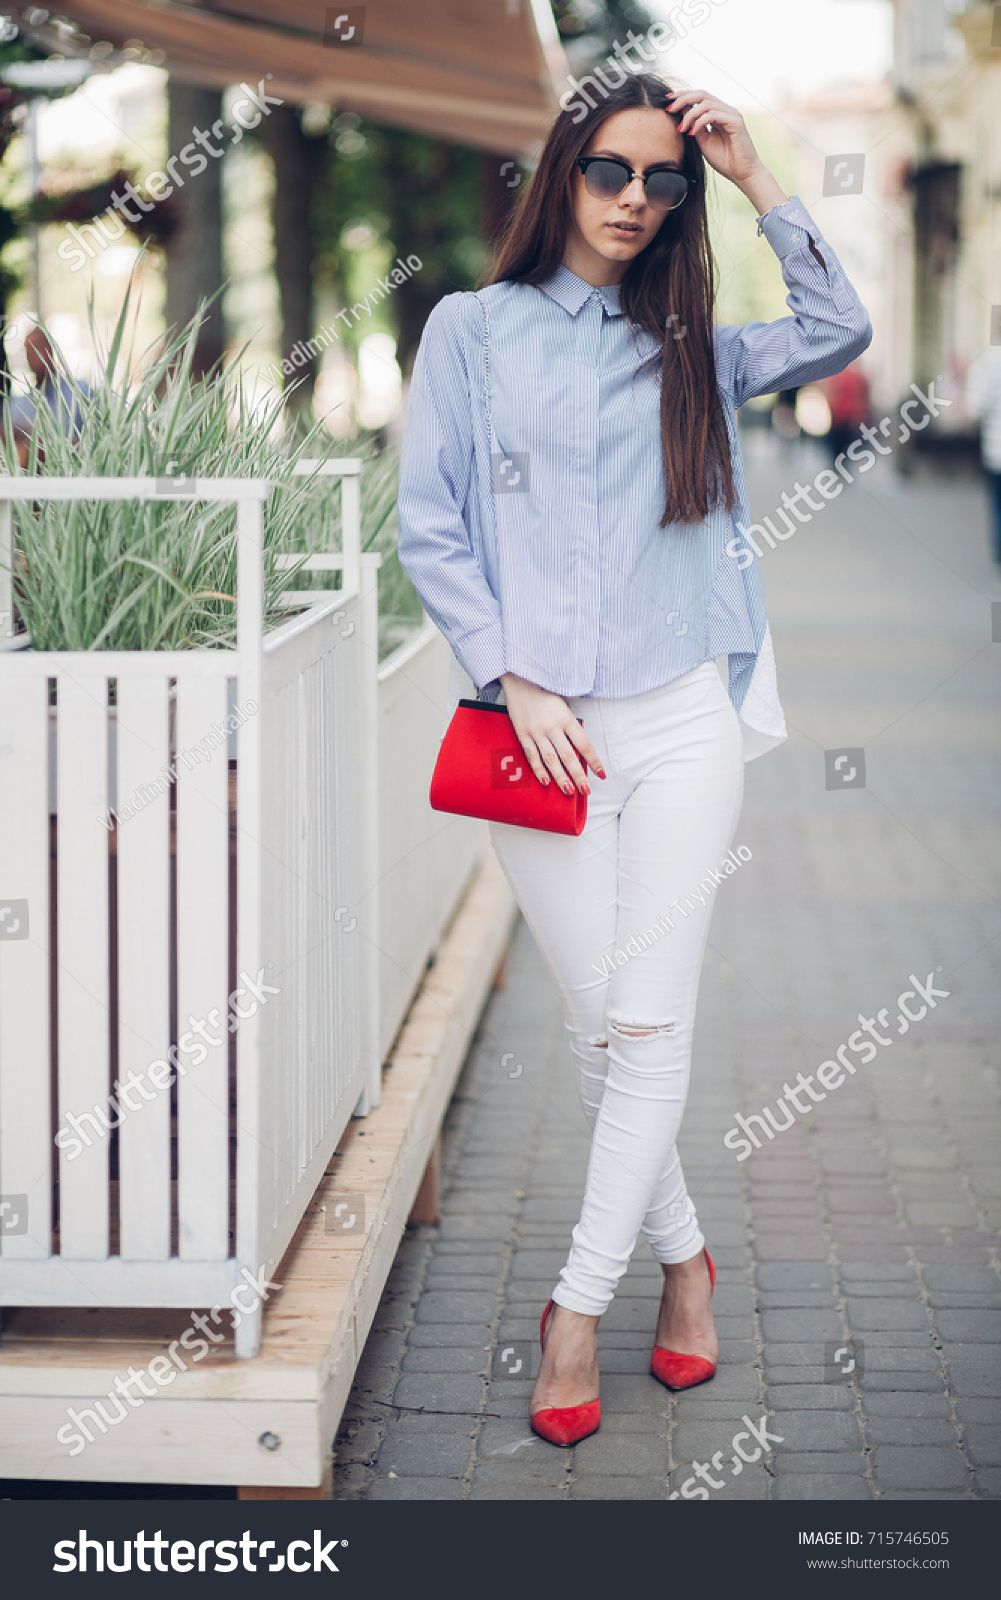 Shirt White Pants Red Shoes Stock Photo ...